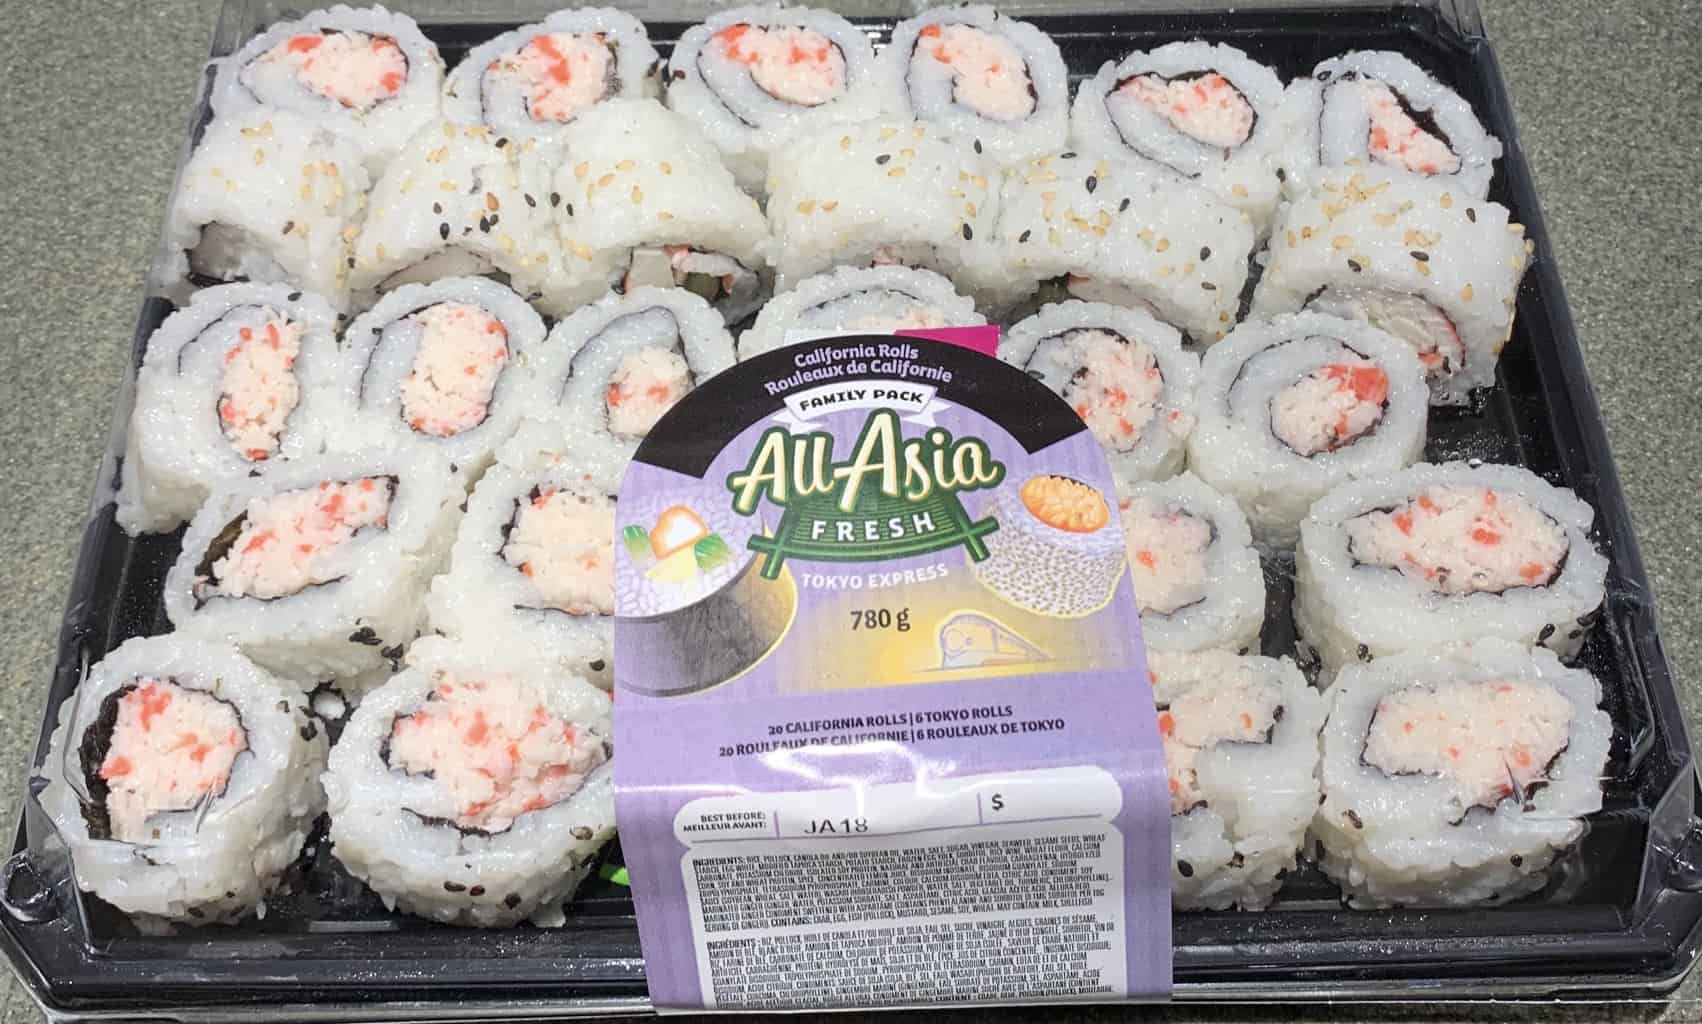 Disappointing Things - The sushi at Costco